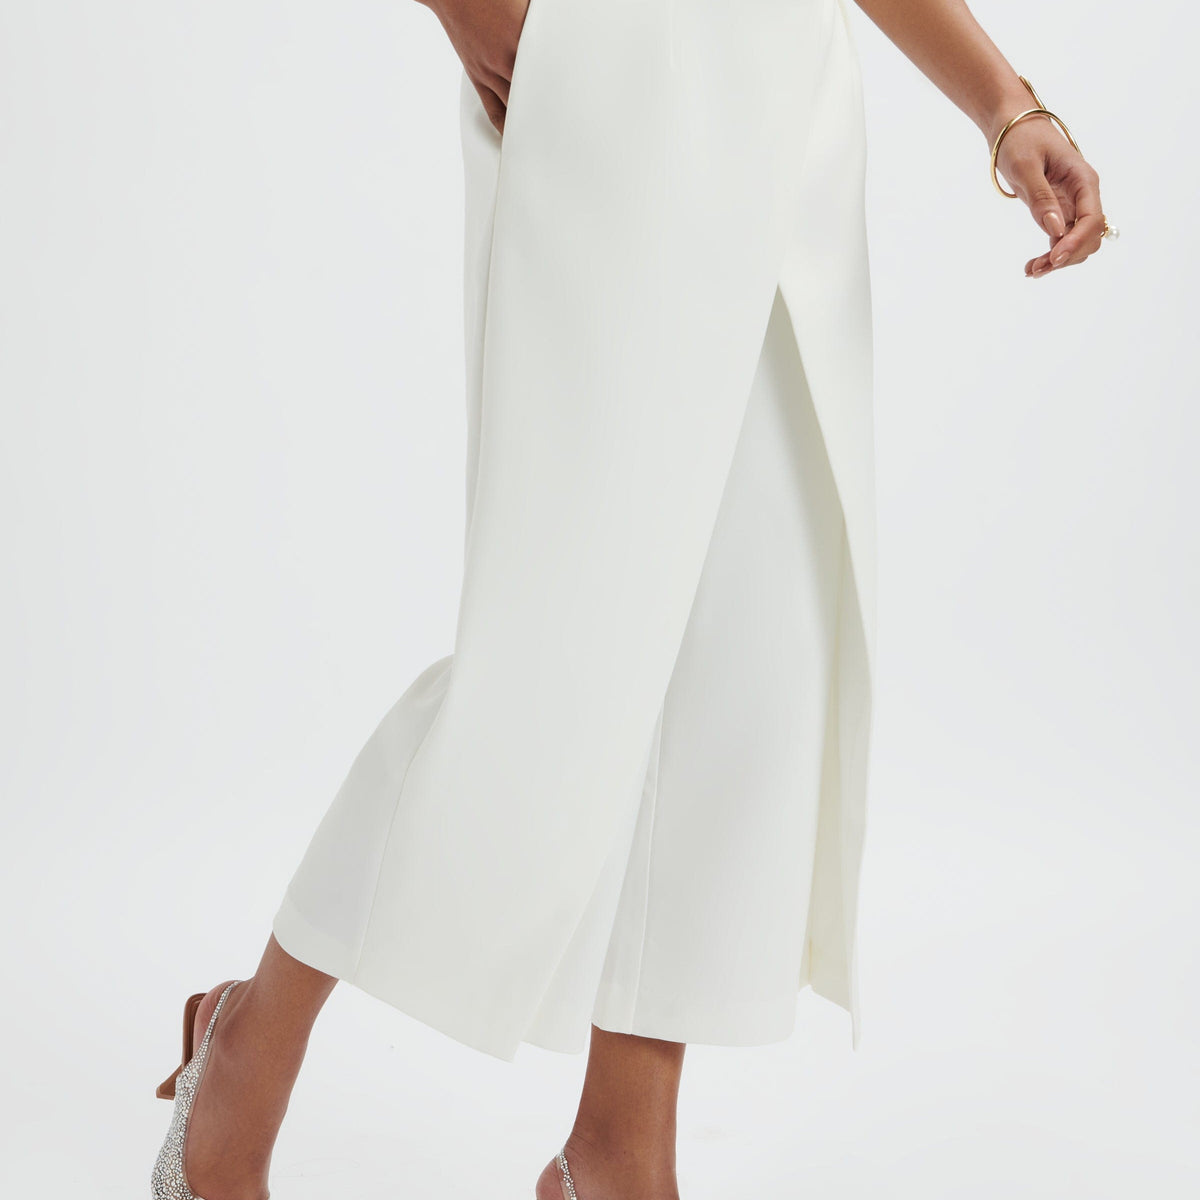 White Culottes - Buy White Culottes online in India